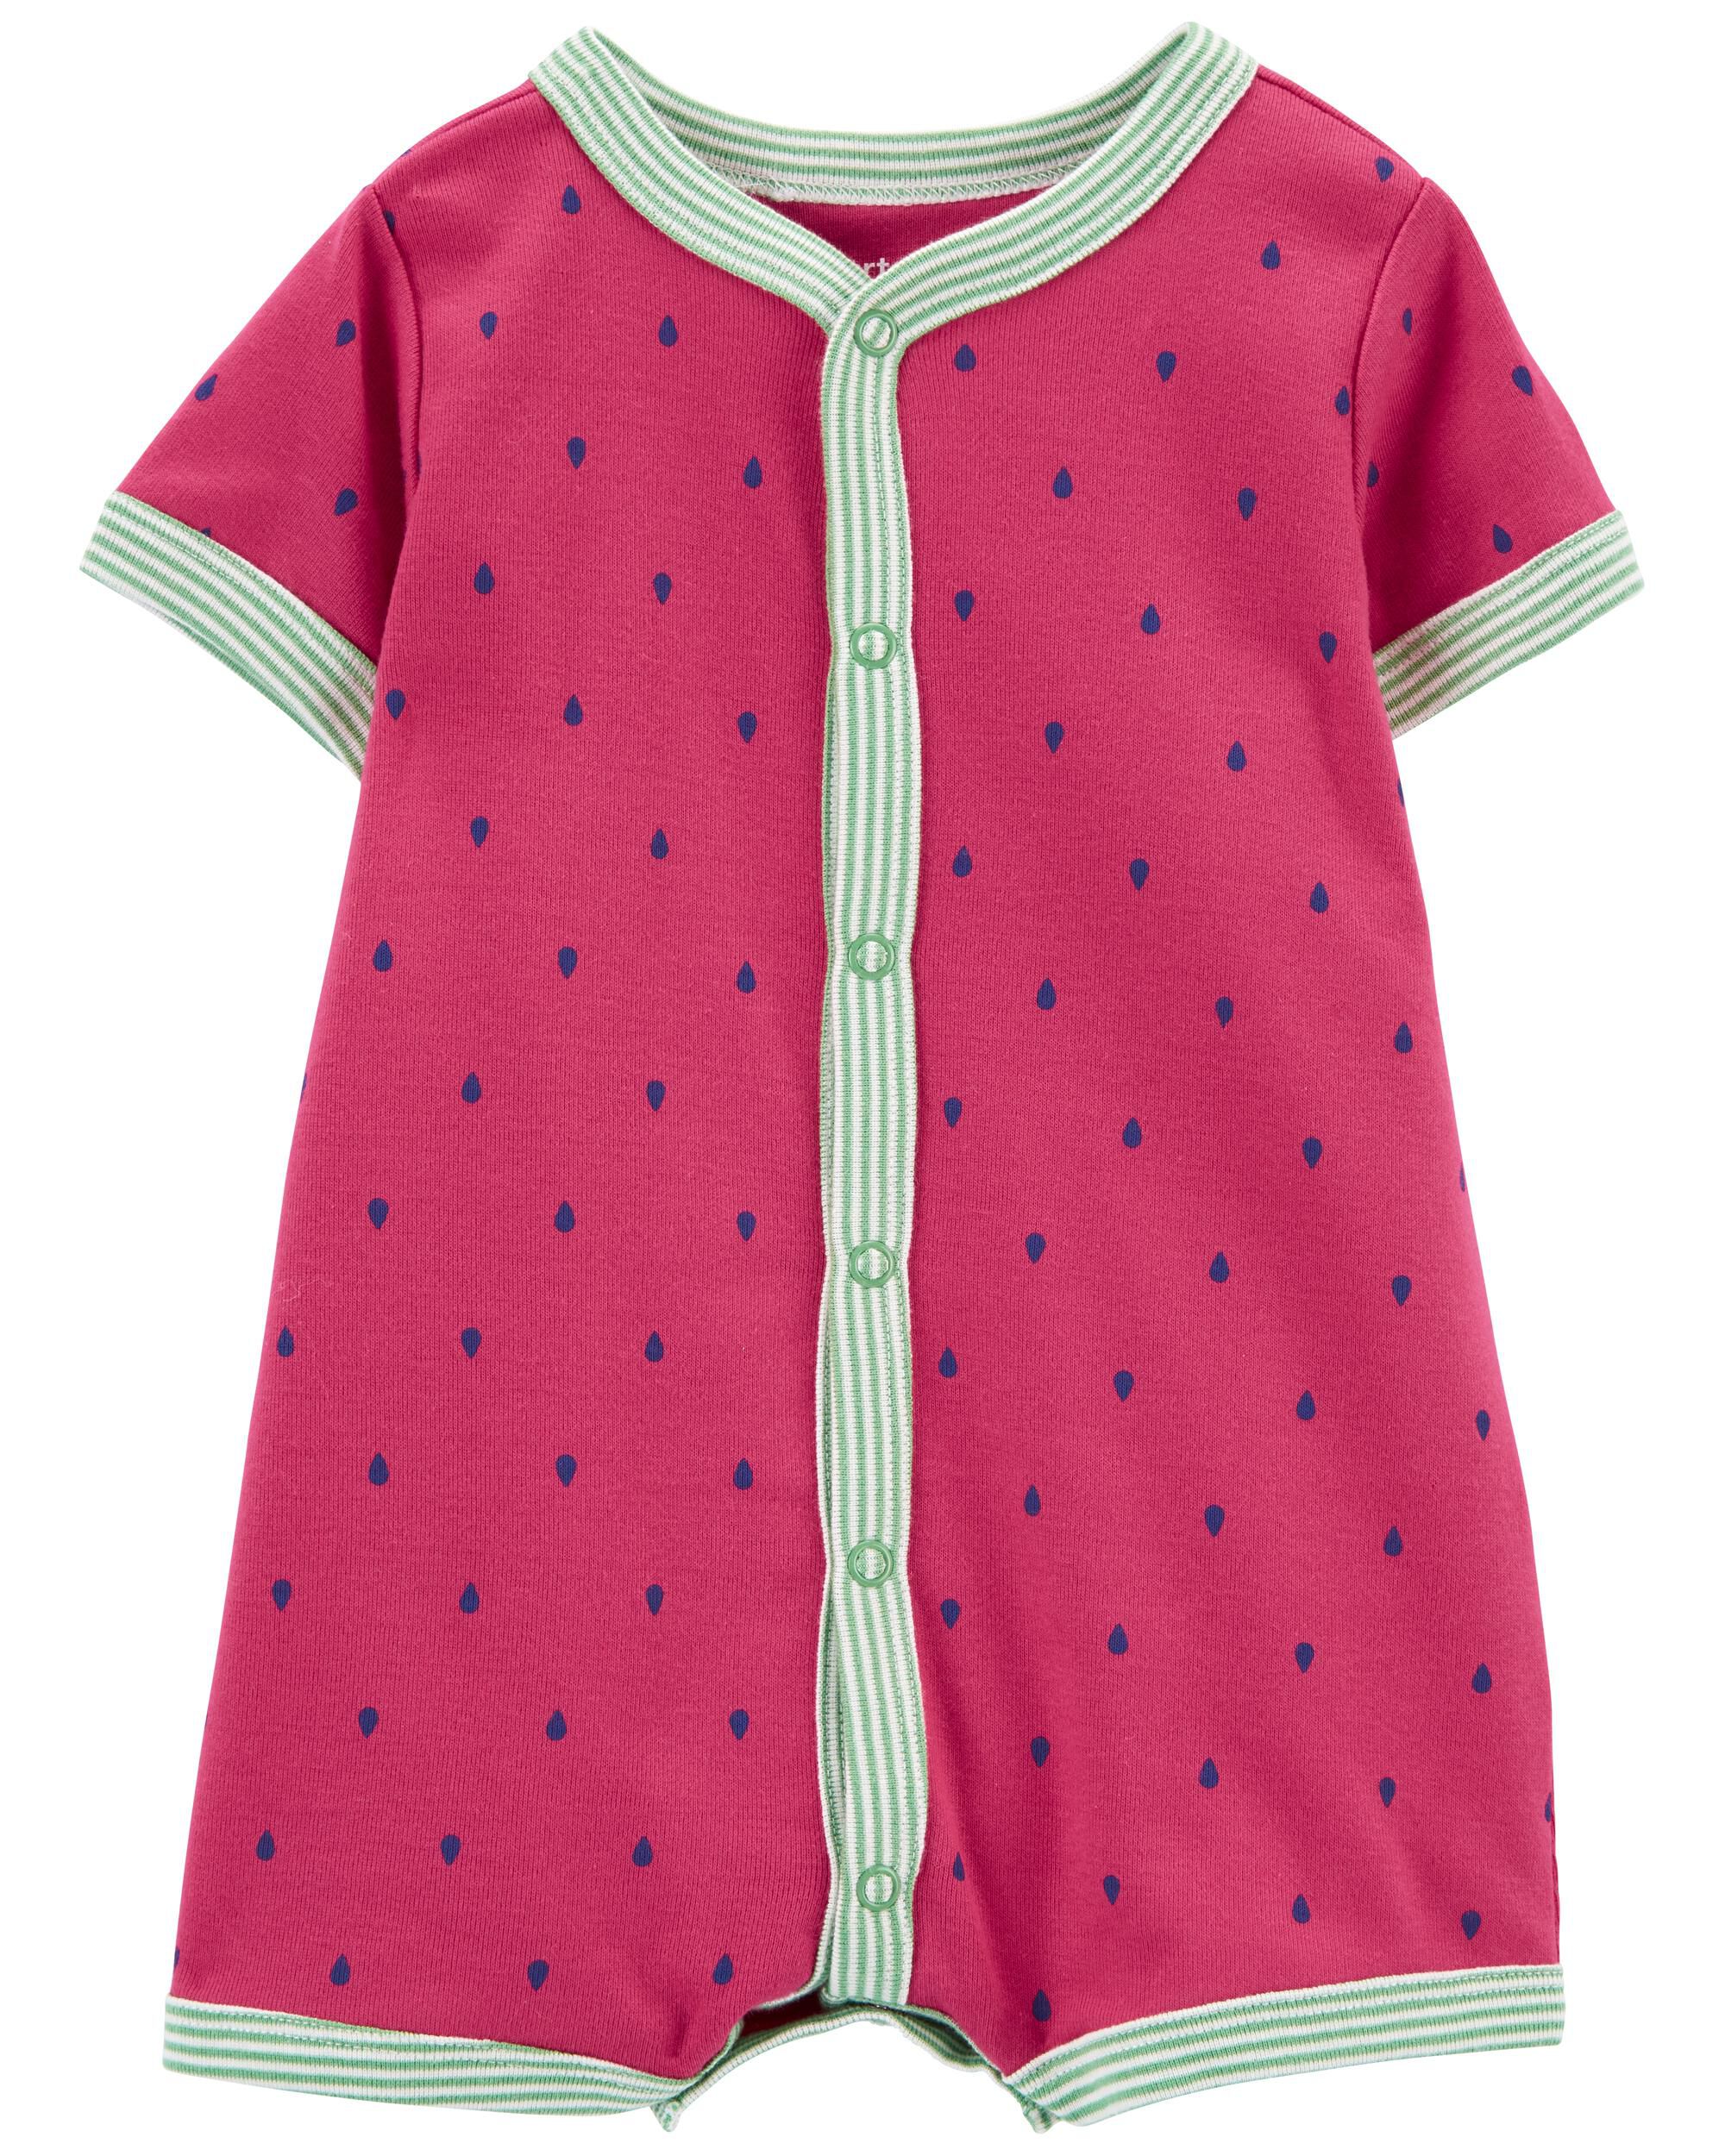 Details about   CARTER'S ONE PIECE CREEPER BABY GIRLS OUTFIT WHITE BLUE PINK STRAWBERRY 